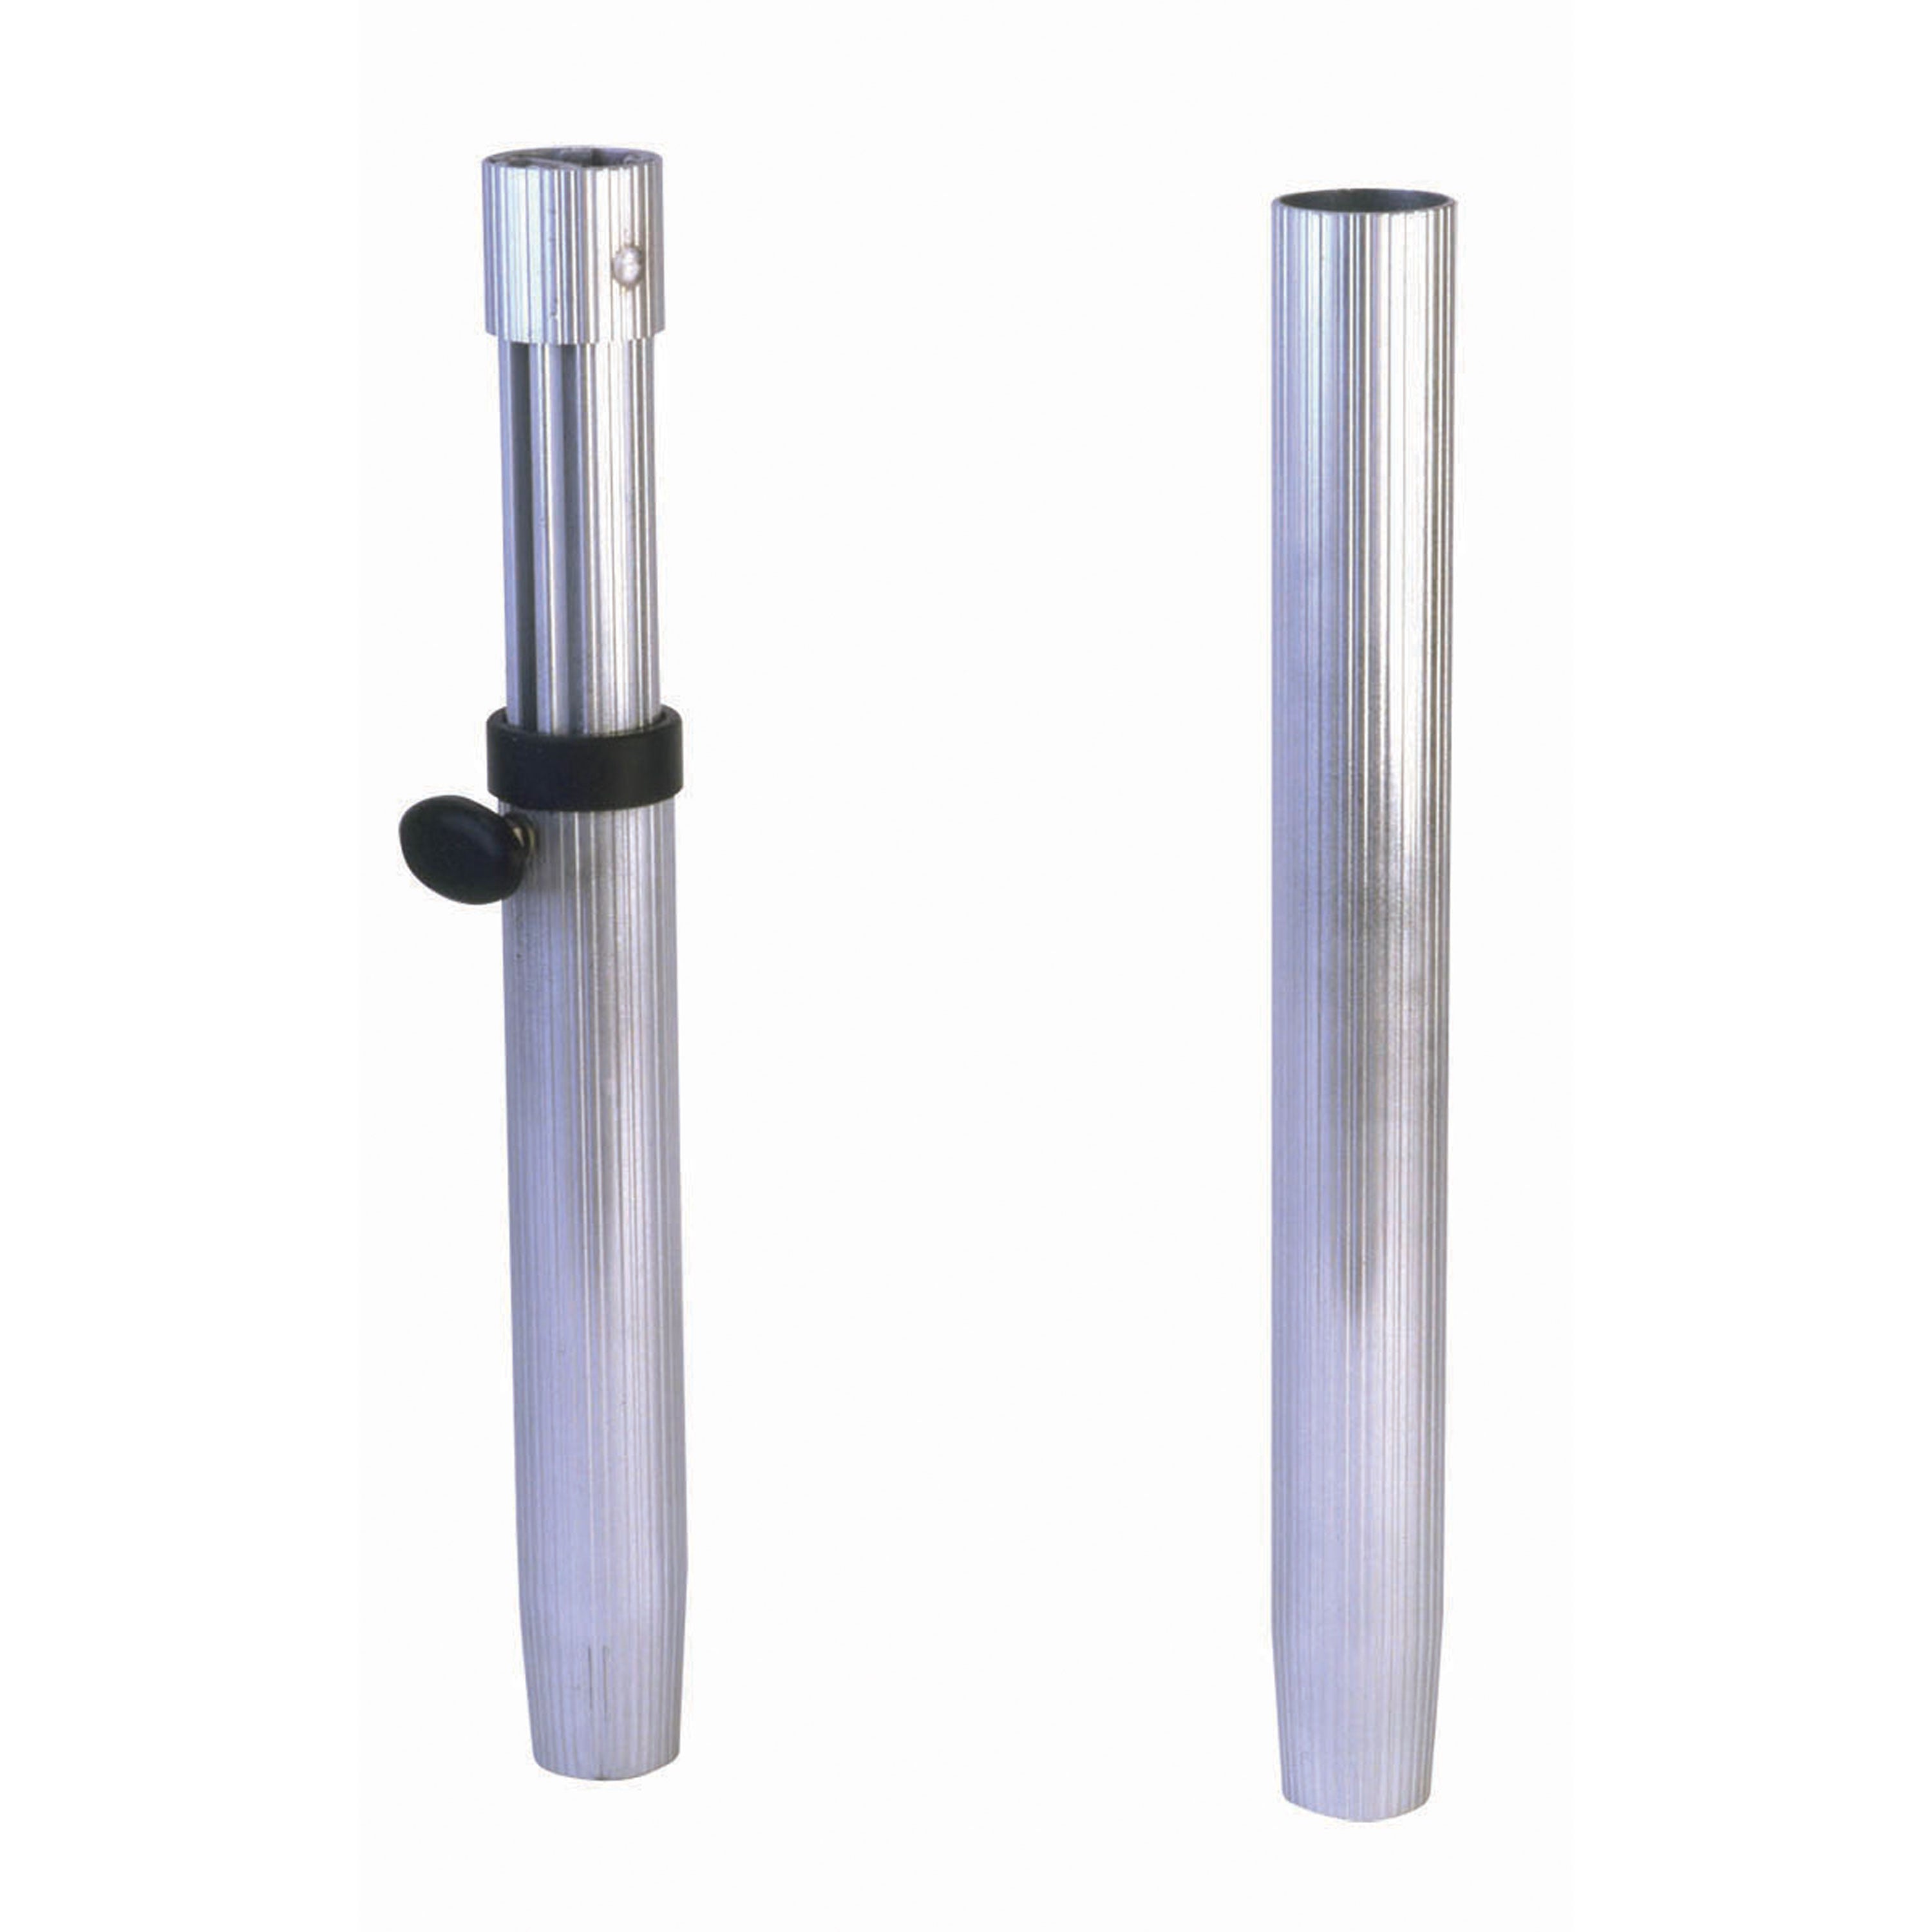 Garelick 75446 Ribbed 2-7/8 Fixed Height Stanchion Post - 28